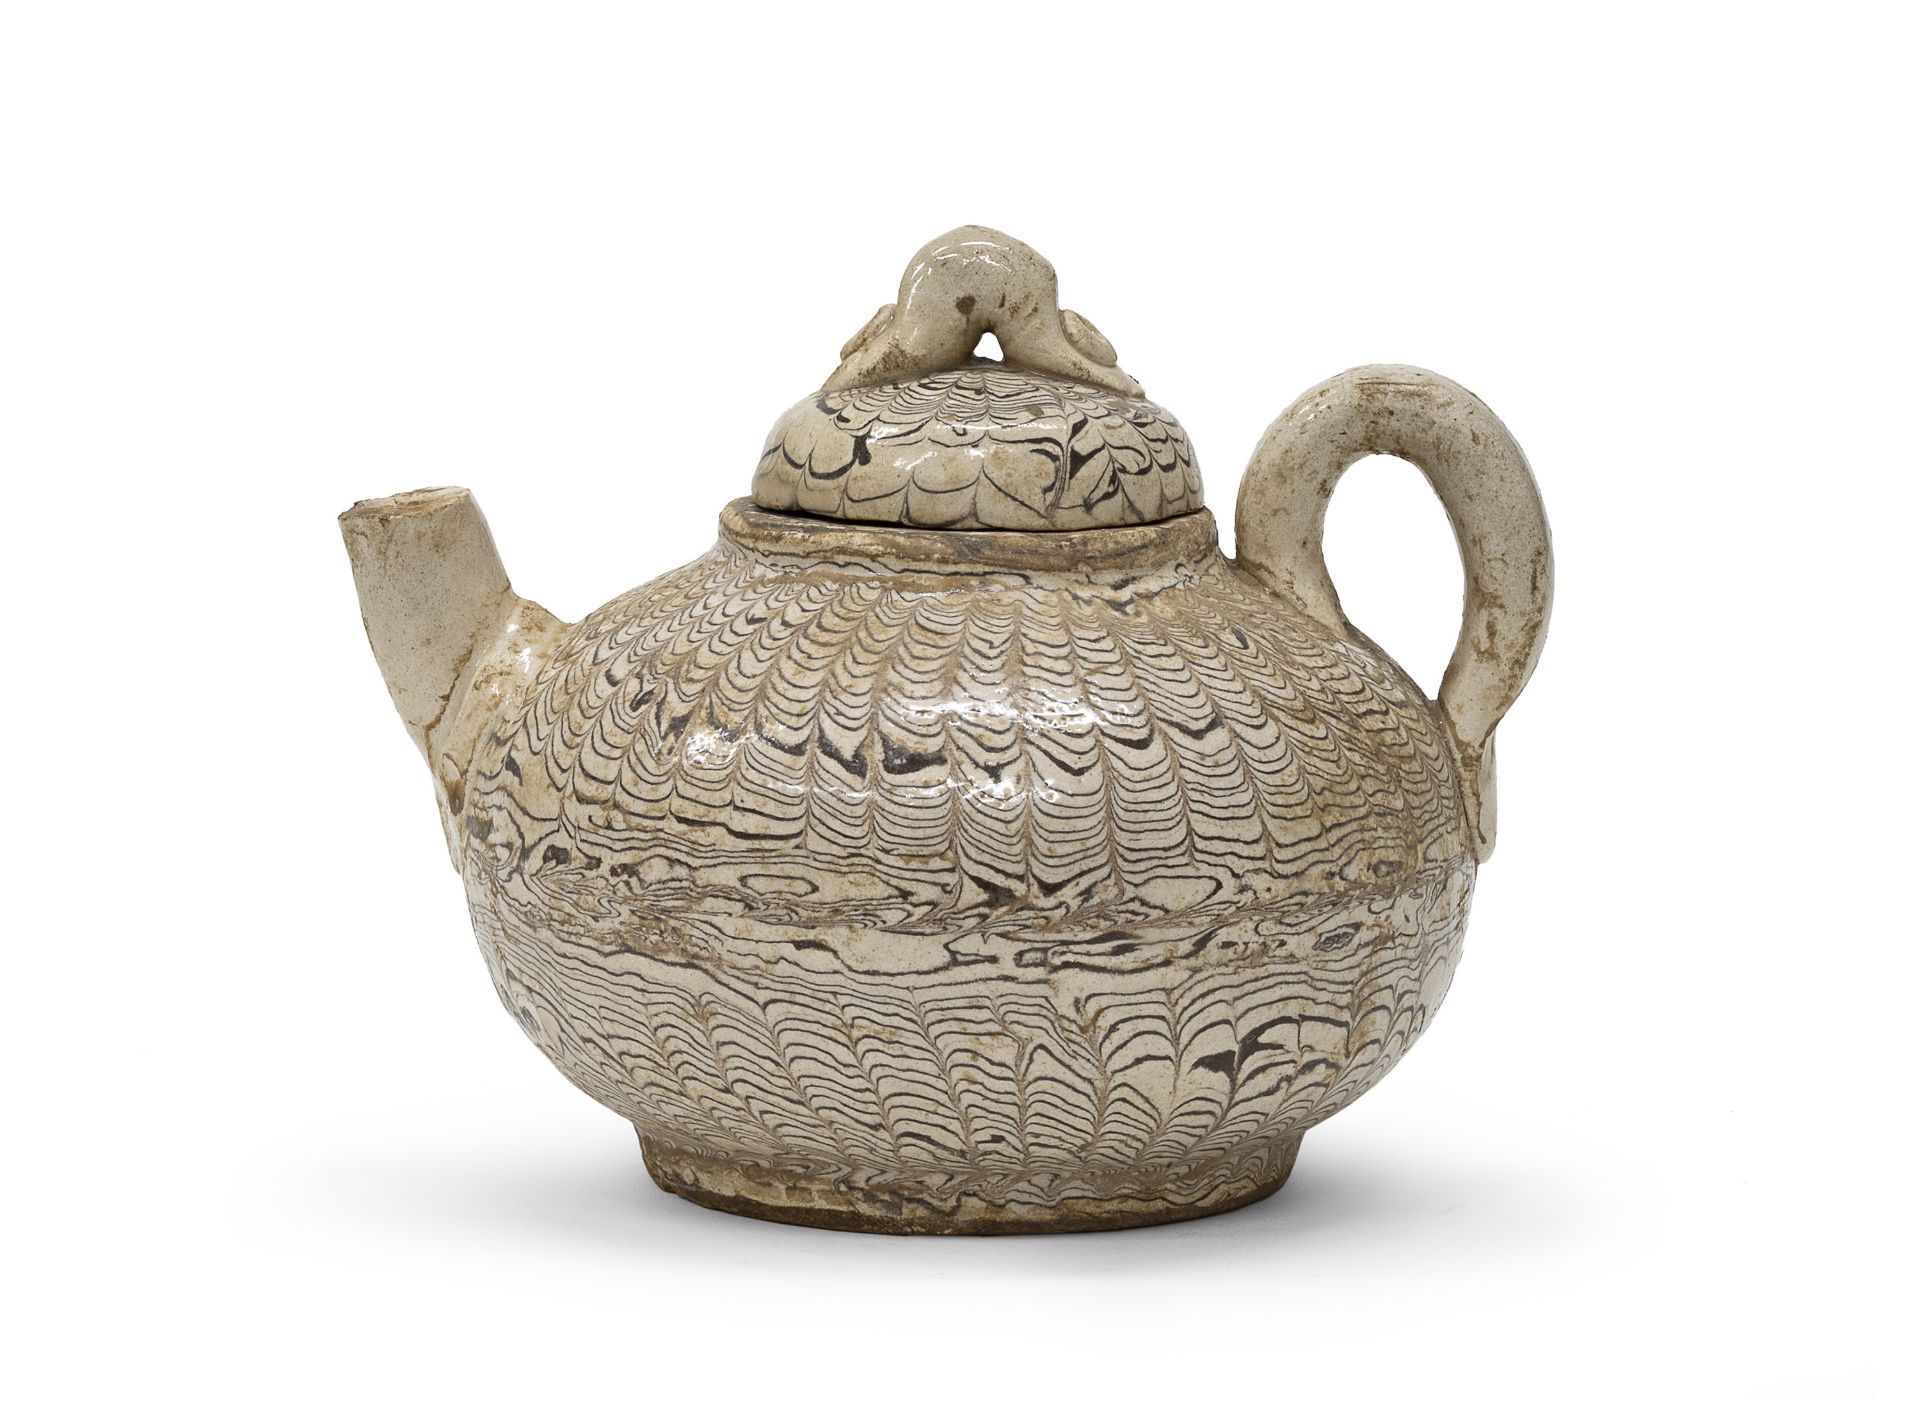 A GLAZED CERAMIC TEAPOT CHINA LATE 19TH EARLY 20TH CENTURY